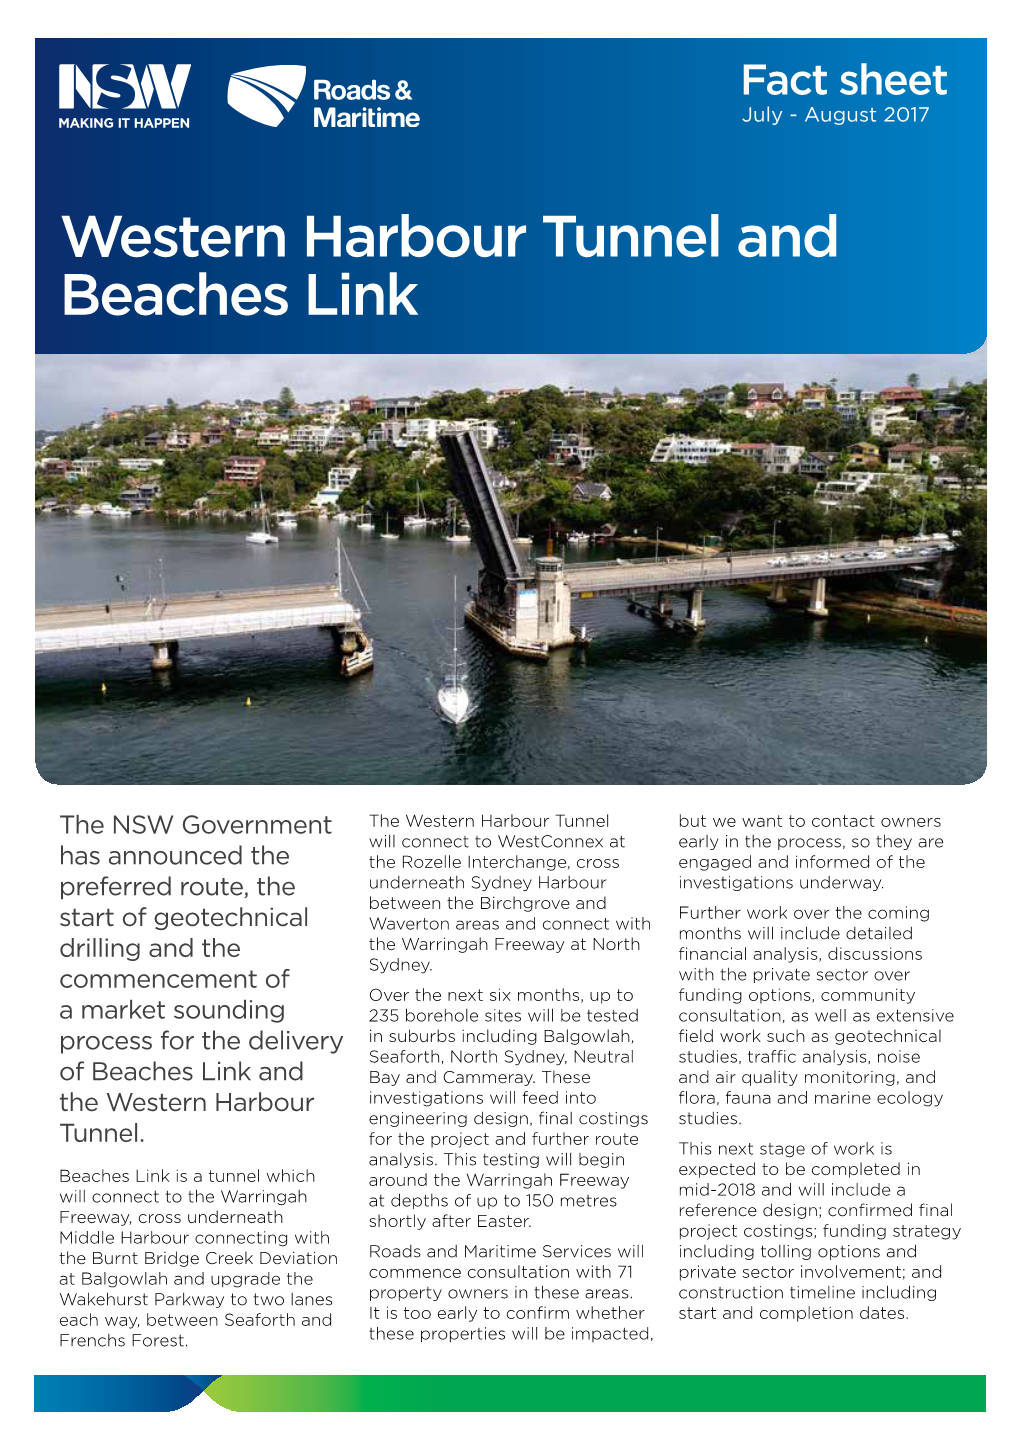 Western Harbour Tunnel and Beaches Link